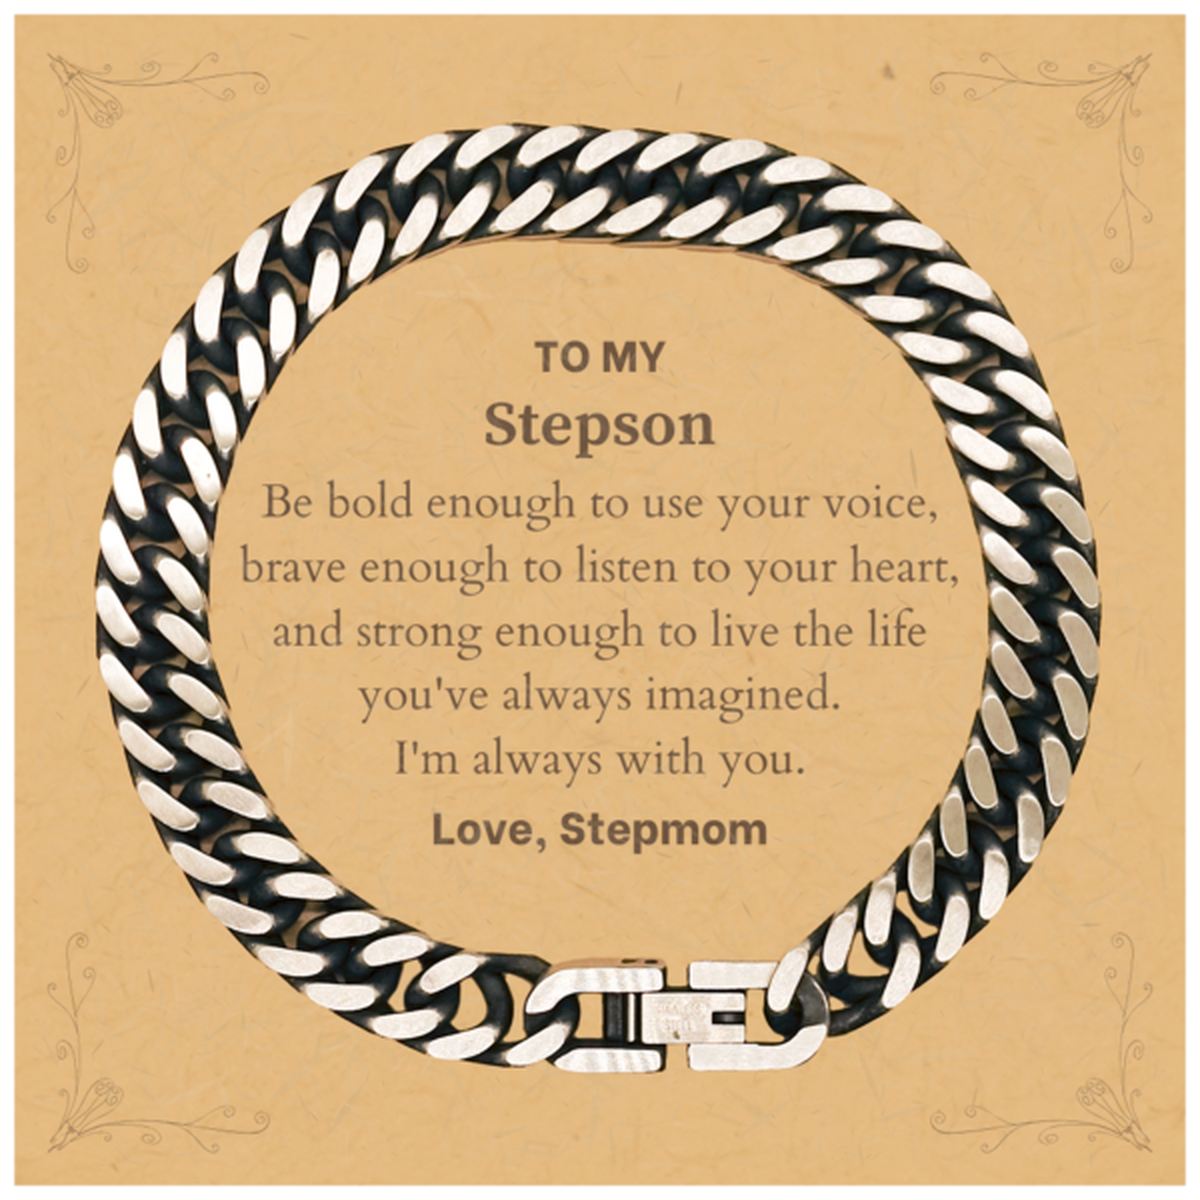 Keepsake Stepson Cuban Link Chain Bracelet Gift Idea Graduation Christmas Birthday Stepson from Stepmom, Stepson Be bold enough to use your voice, brave enough to listen to your heart. Love, Stepmom